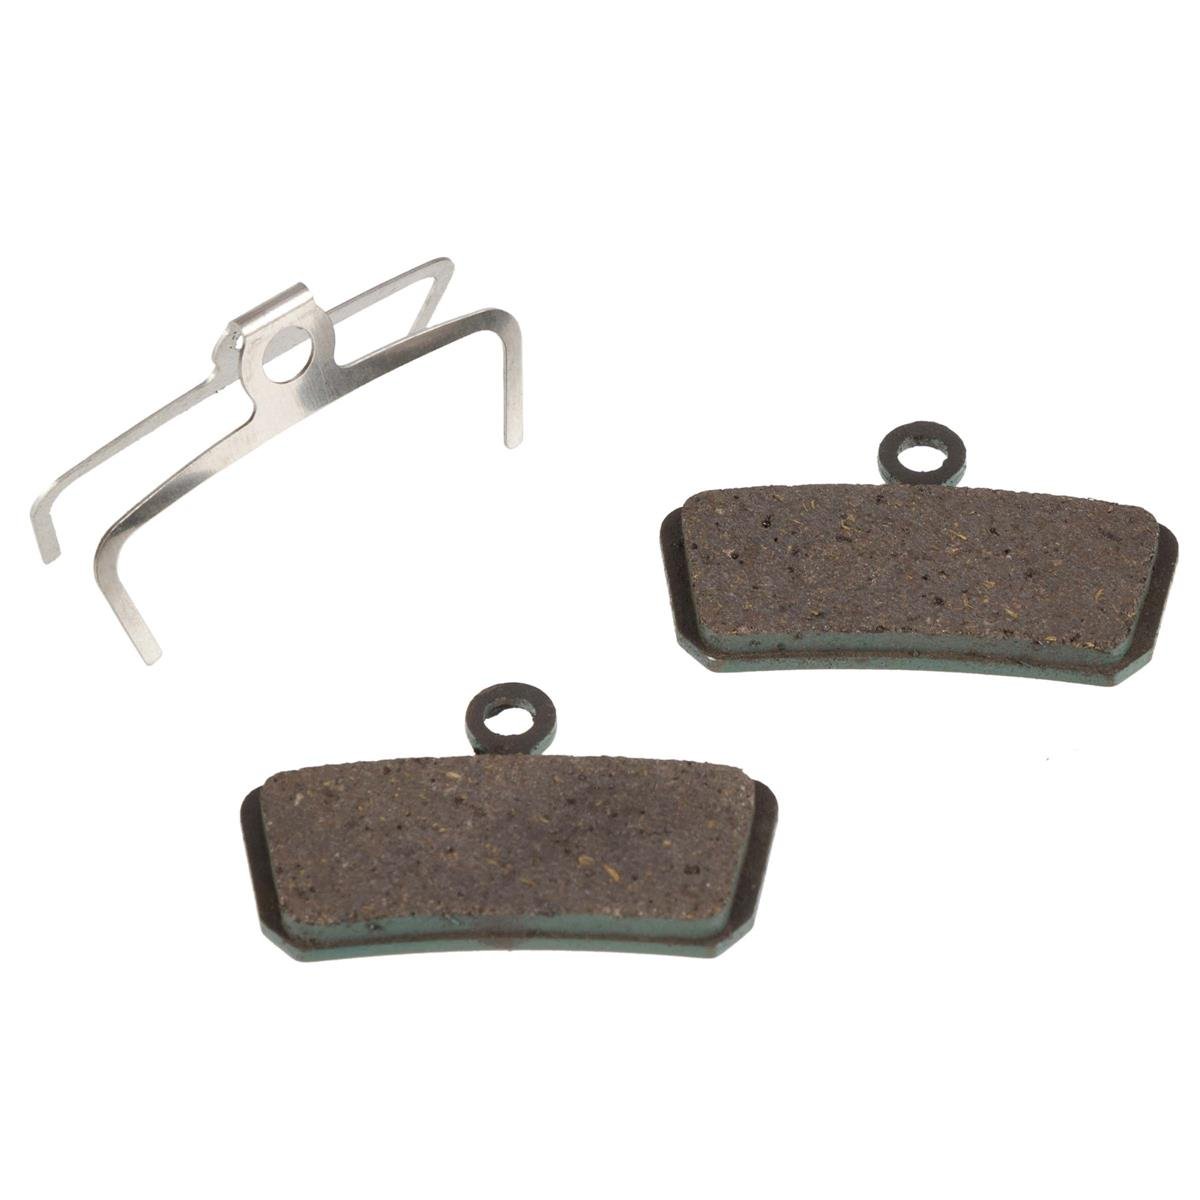 Semi Metallic Disc Brake Pads compatible with Clarks M4 